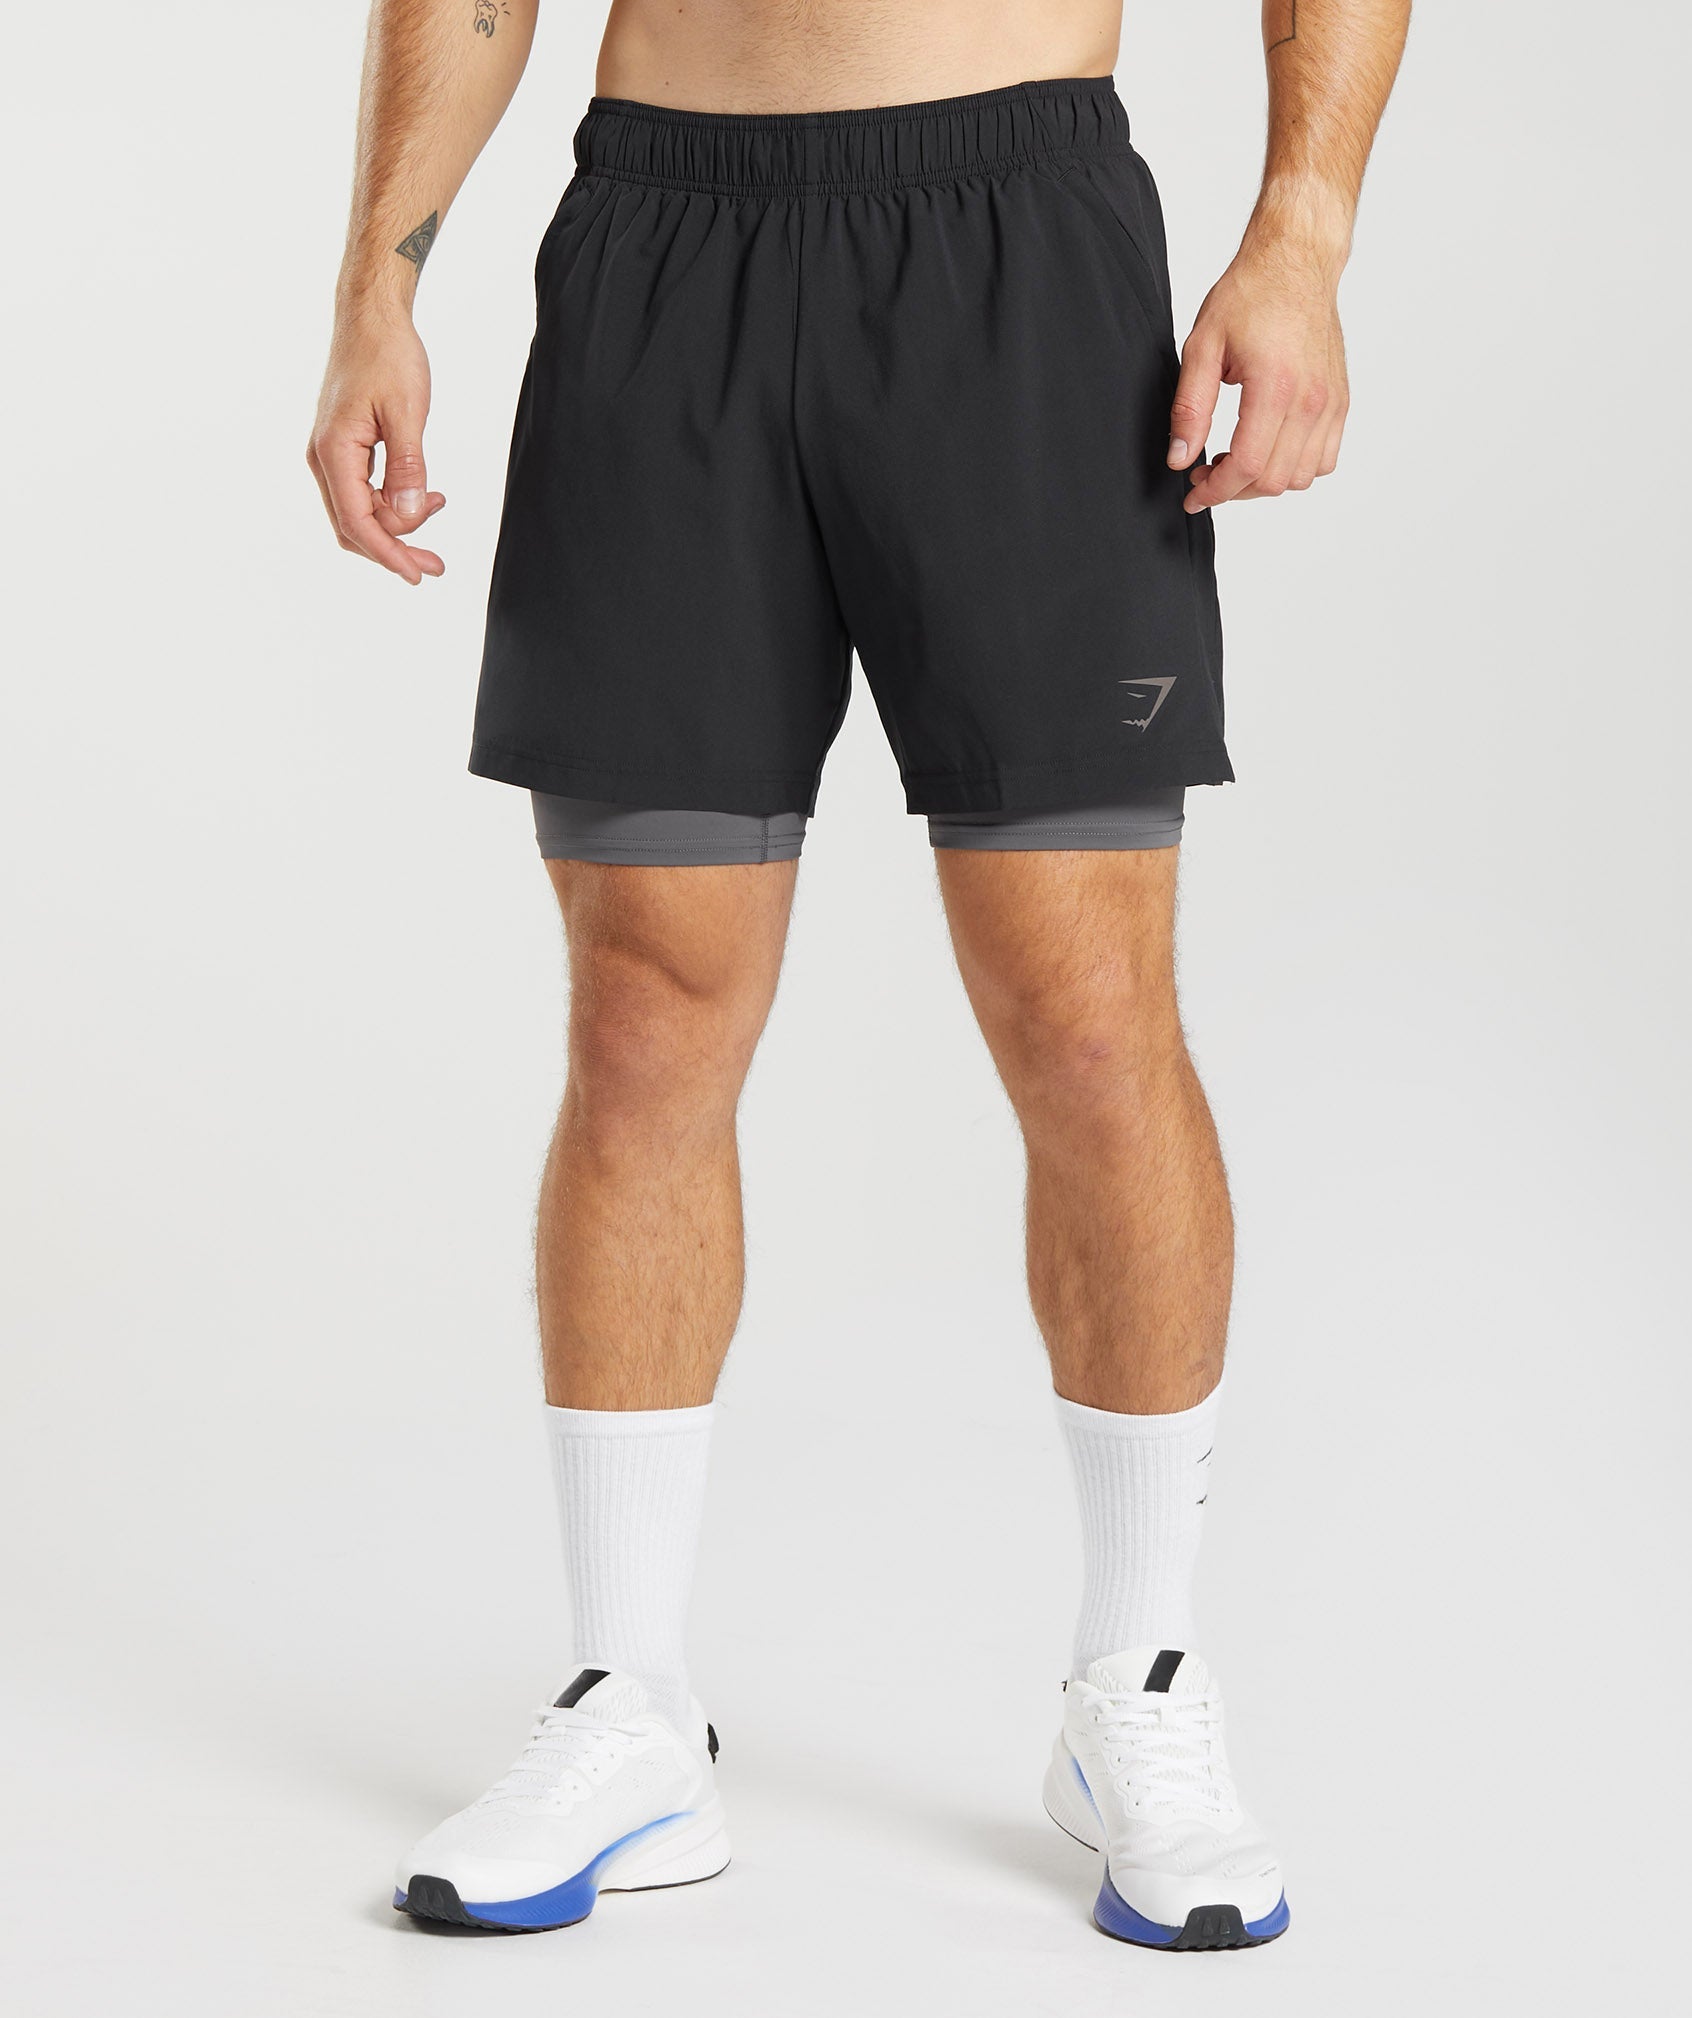 Sport 7" 2 In 1 Shorts in Black/Silhouette Grey - view 1